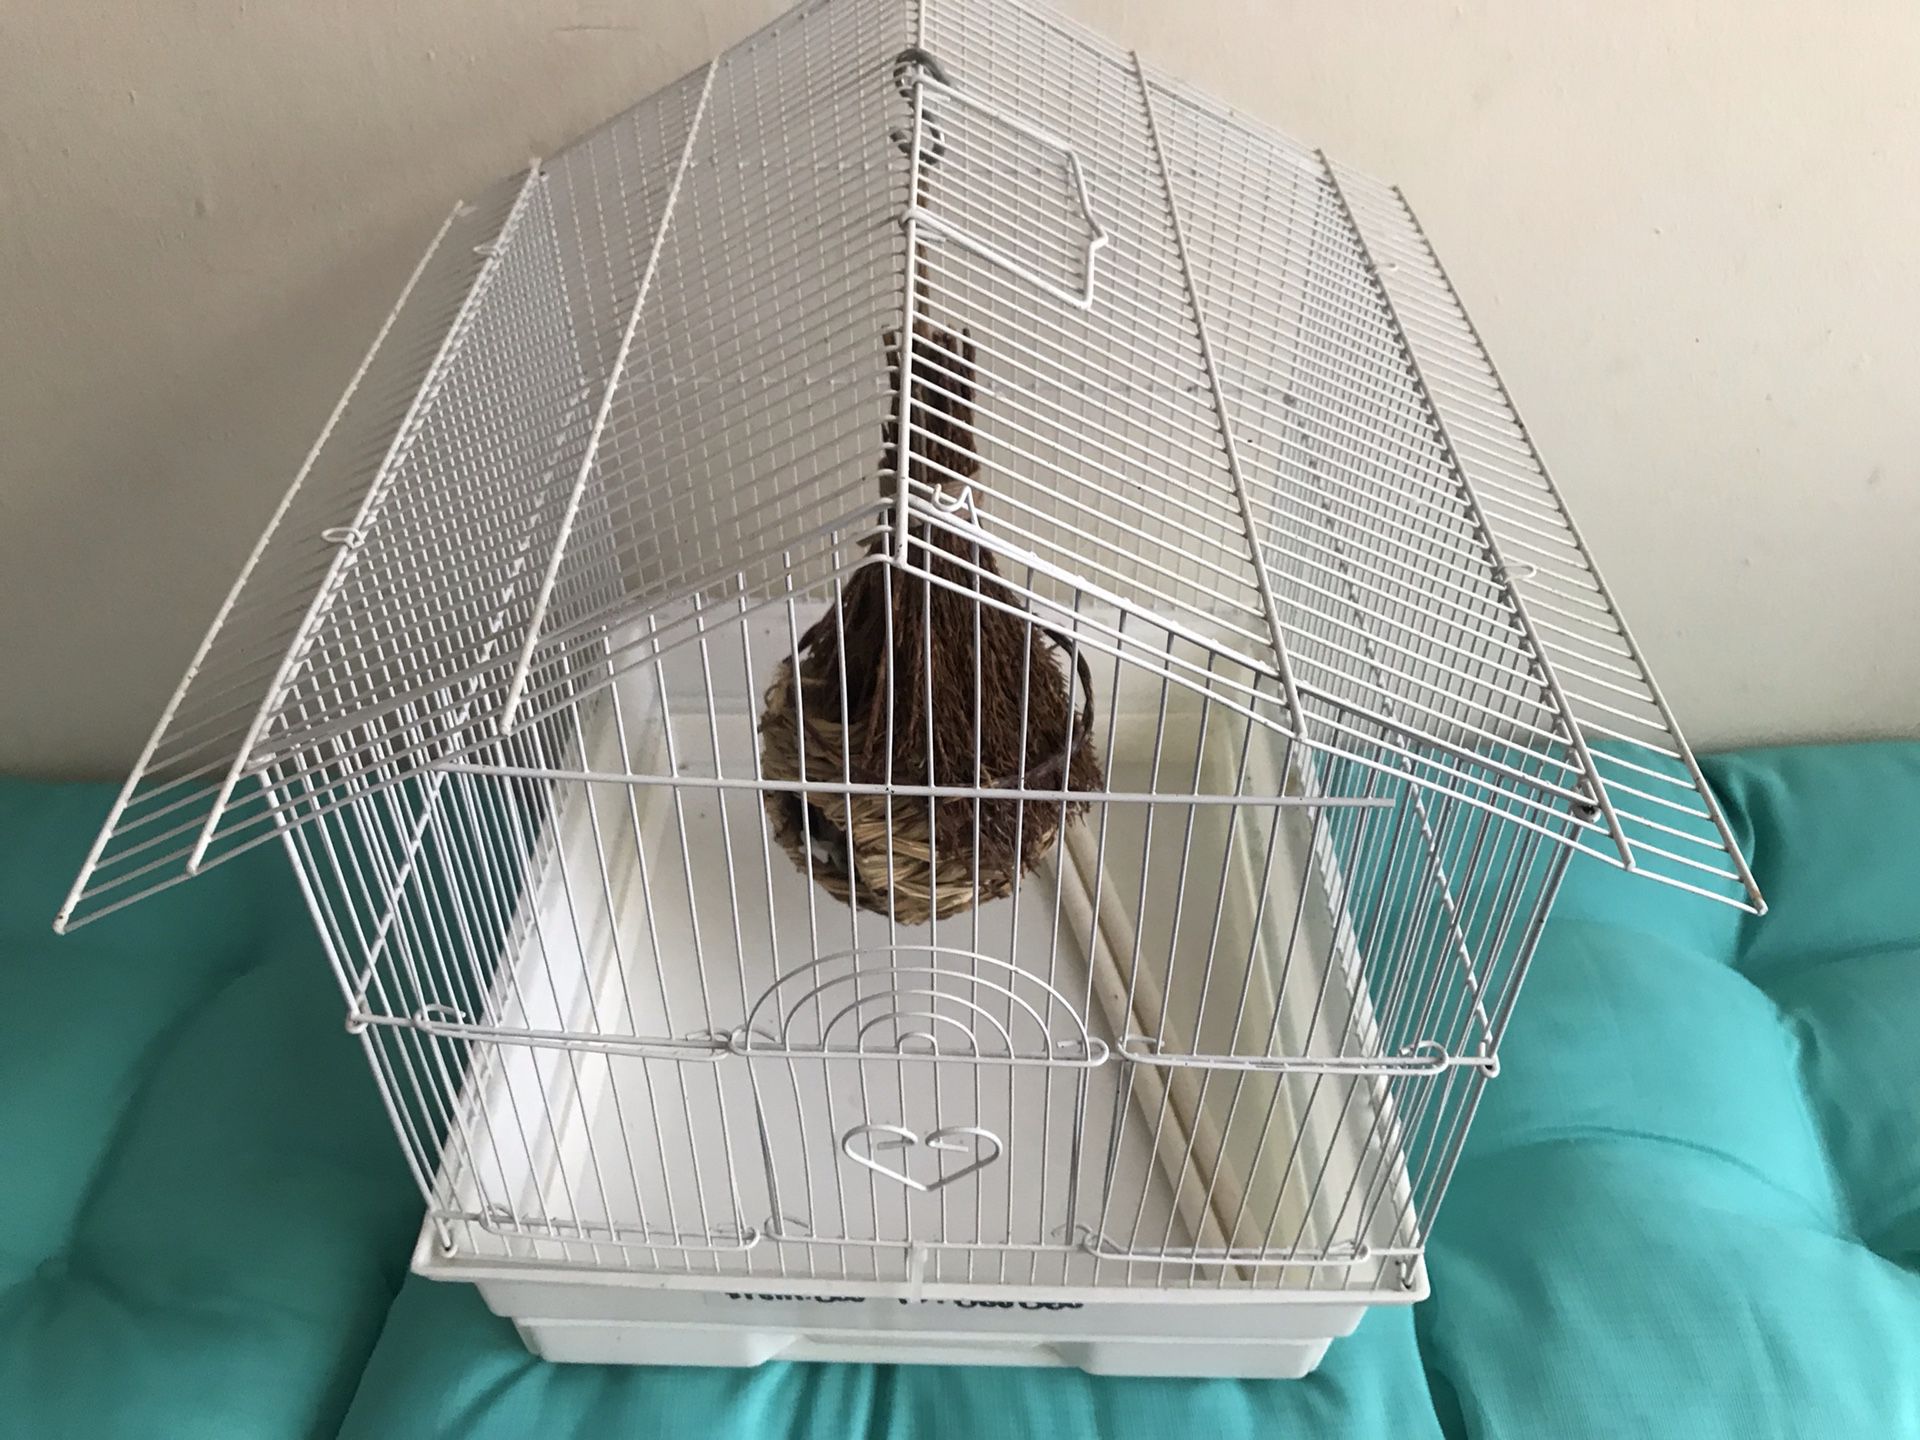 Bird Cage White New For Sale $30 Cash Only Serious Buyers Only!!!